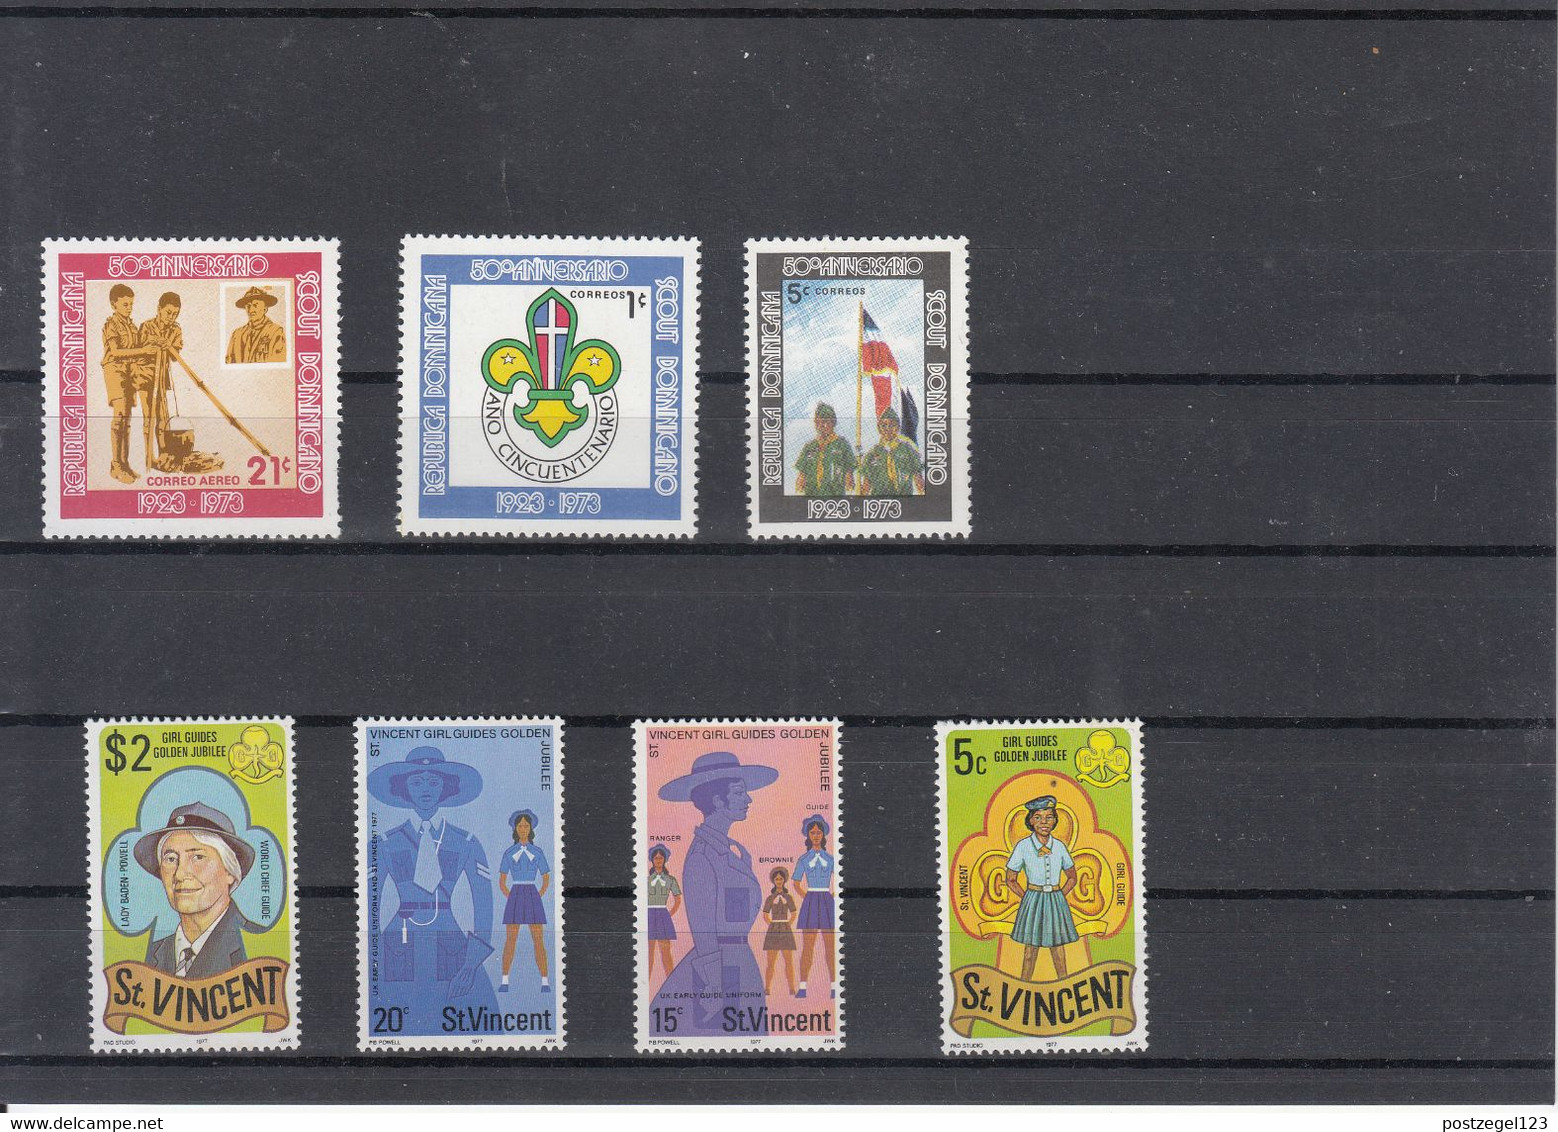 Different Countries - Unused Stamps